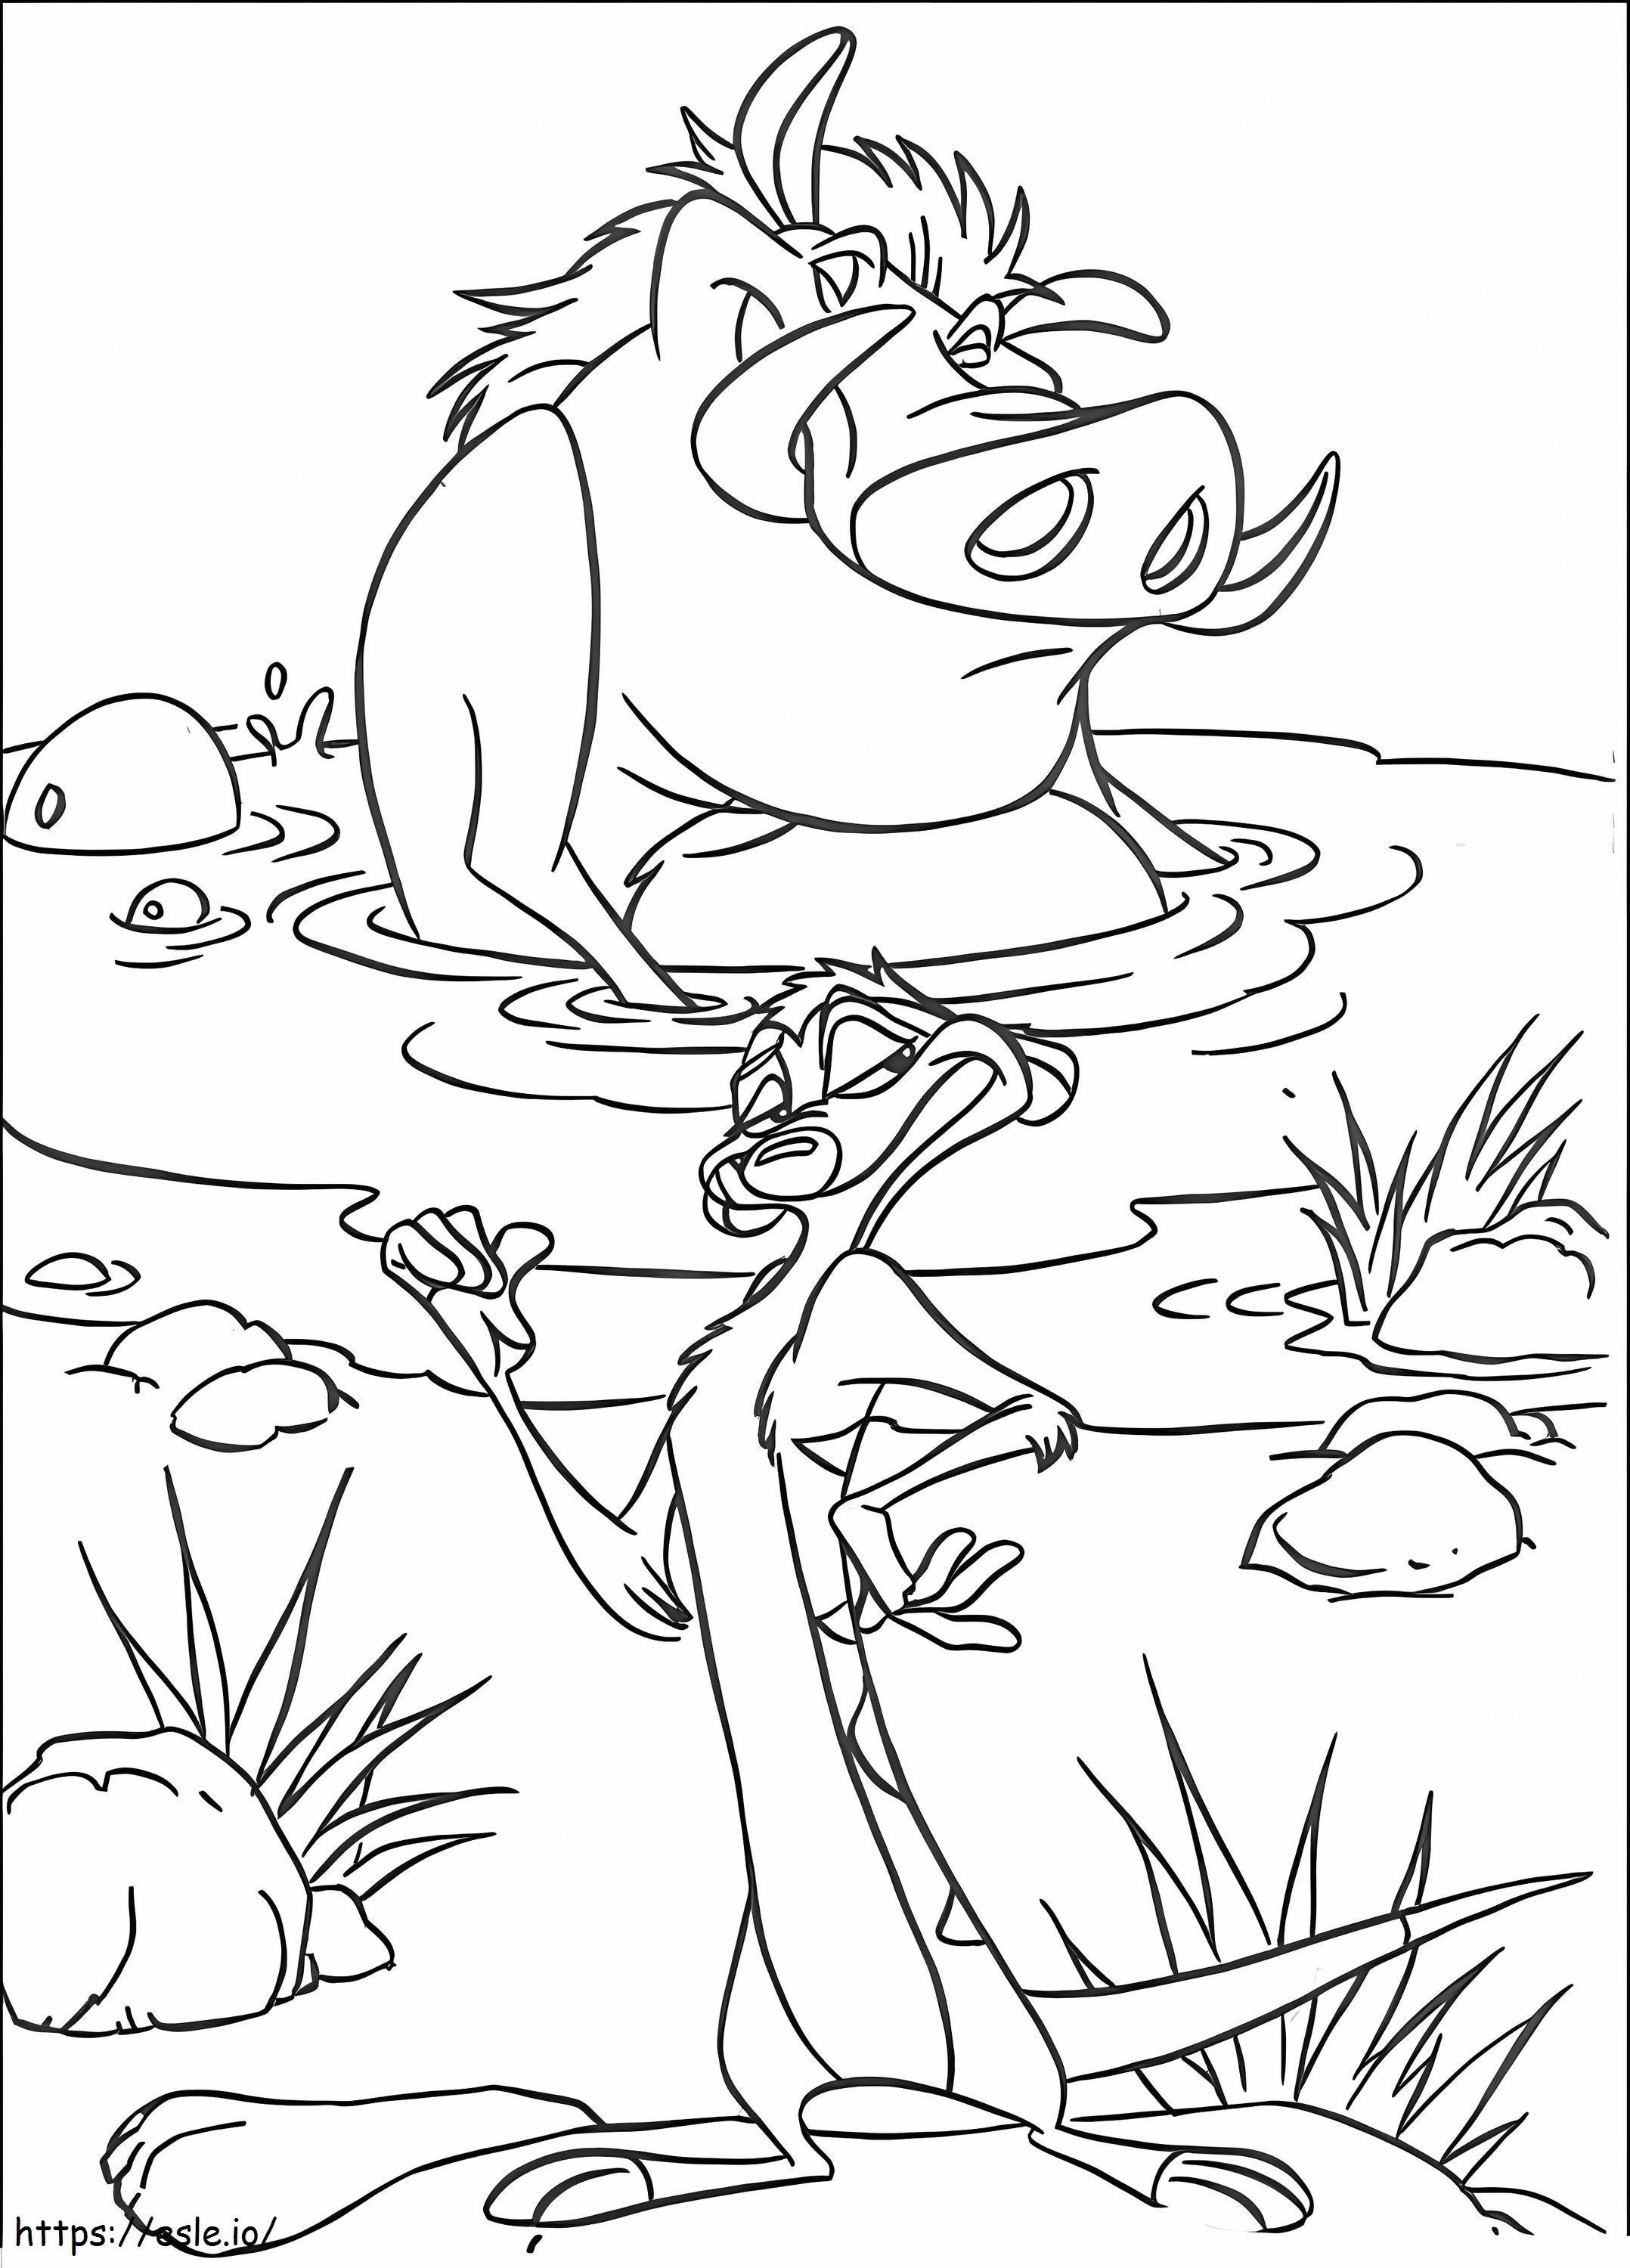 Timon And Pumbaa To Color coloring page